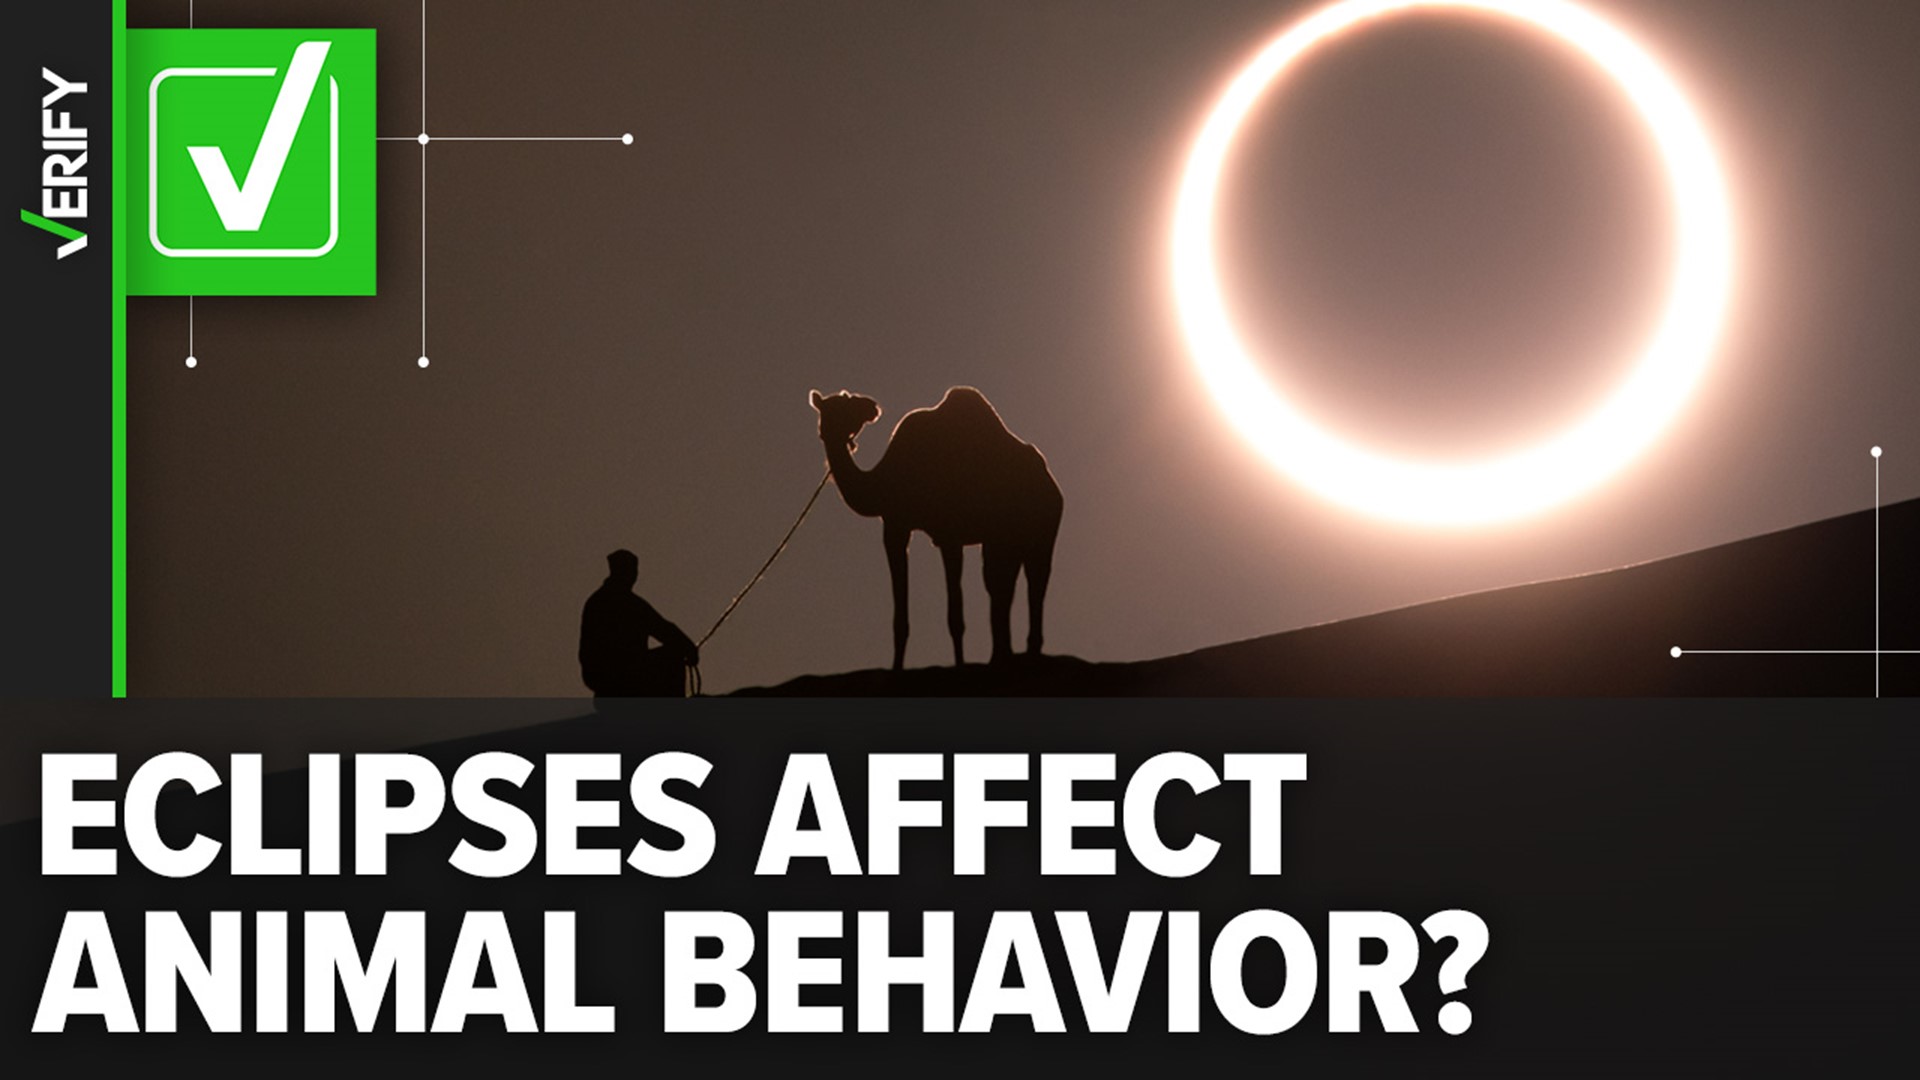 How a total solar eclipse affects animal behavior